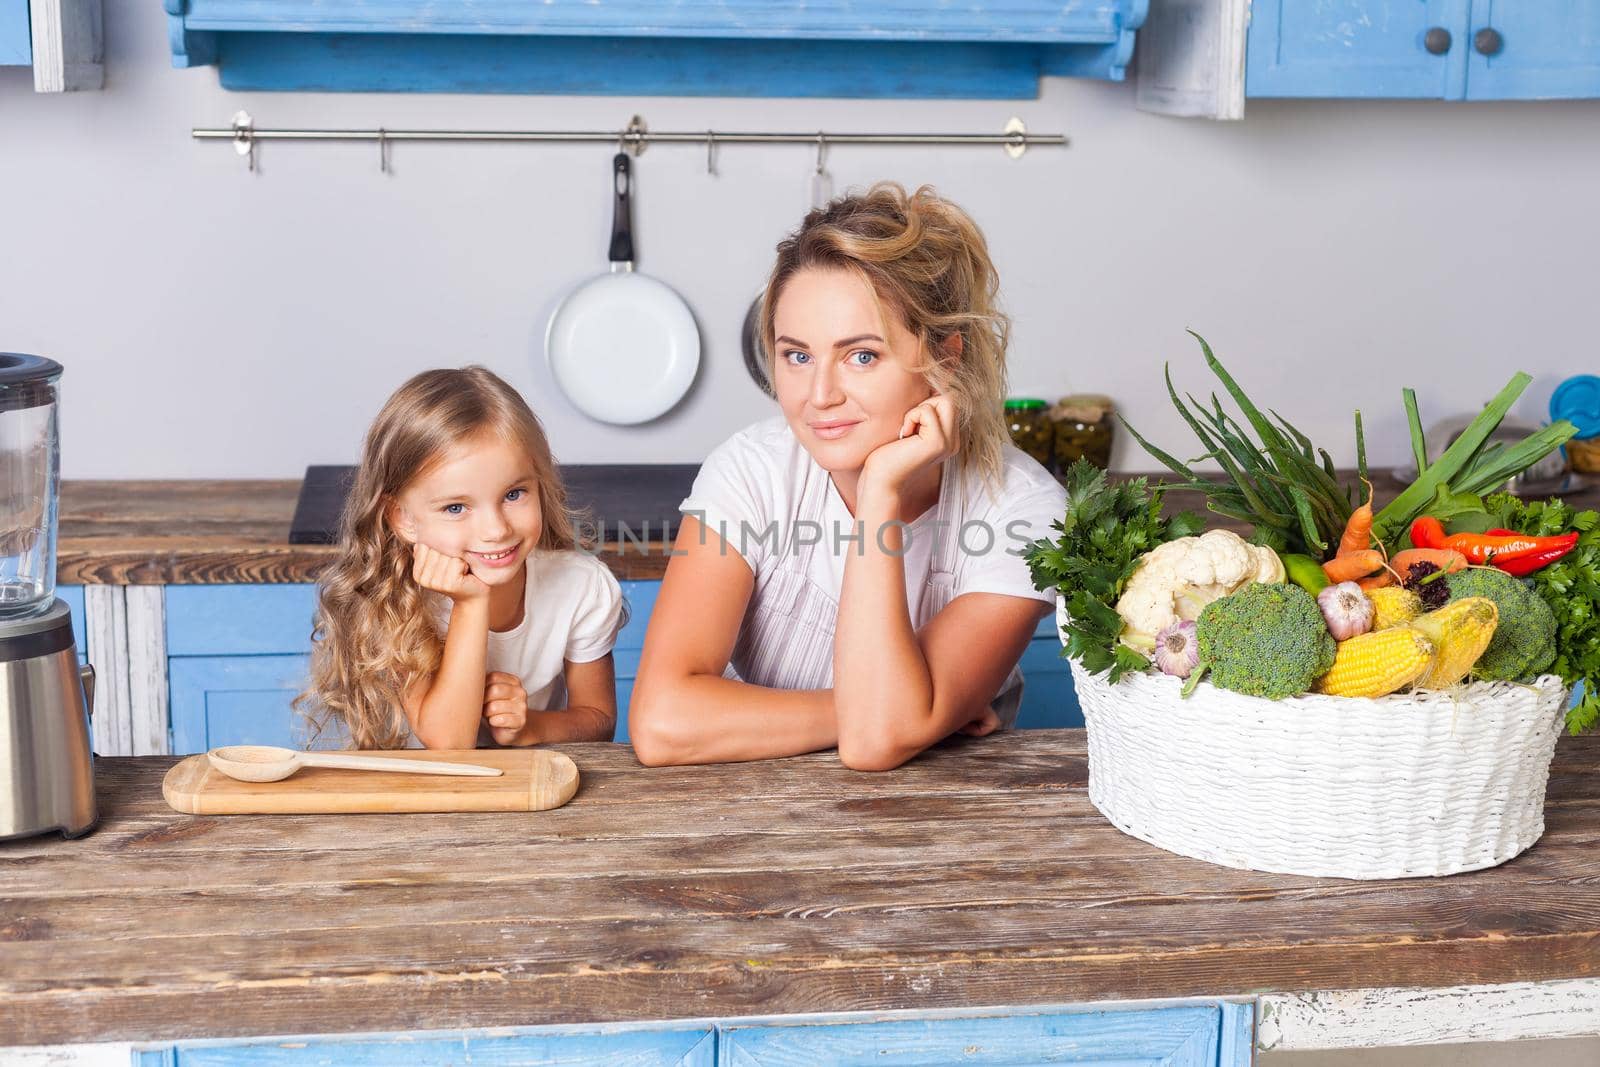 Young cheerful mother and little daughter leaning on table, standing in kitchen with modern furniture, basket of fresh vegetables on table, eco-friendly vegetarian food, vegan nutrition, healthcare